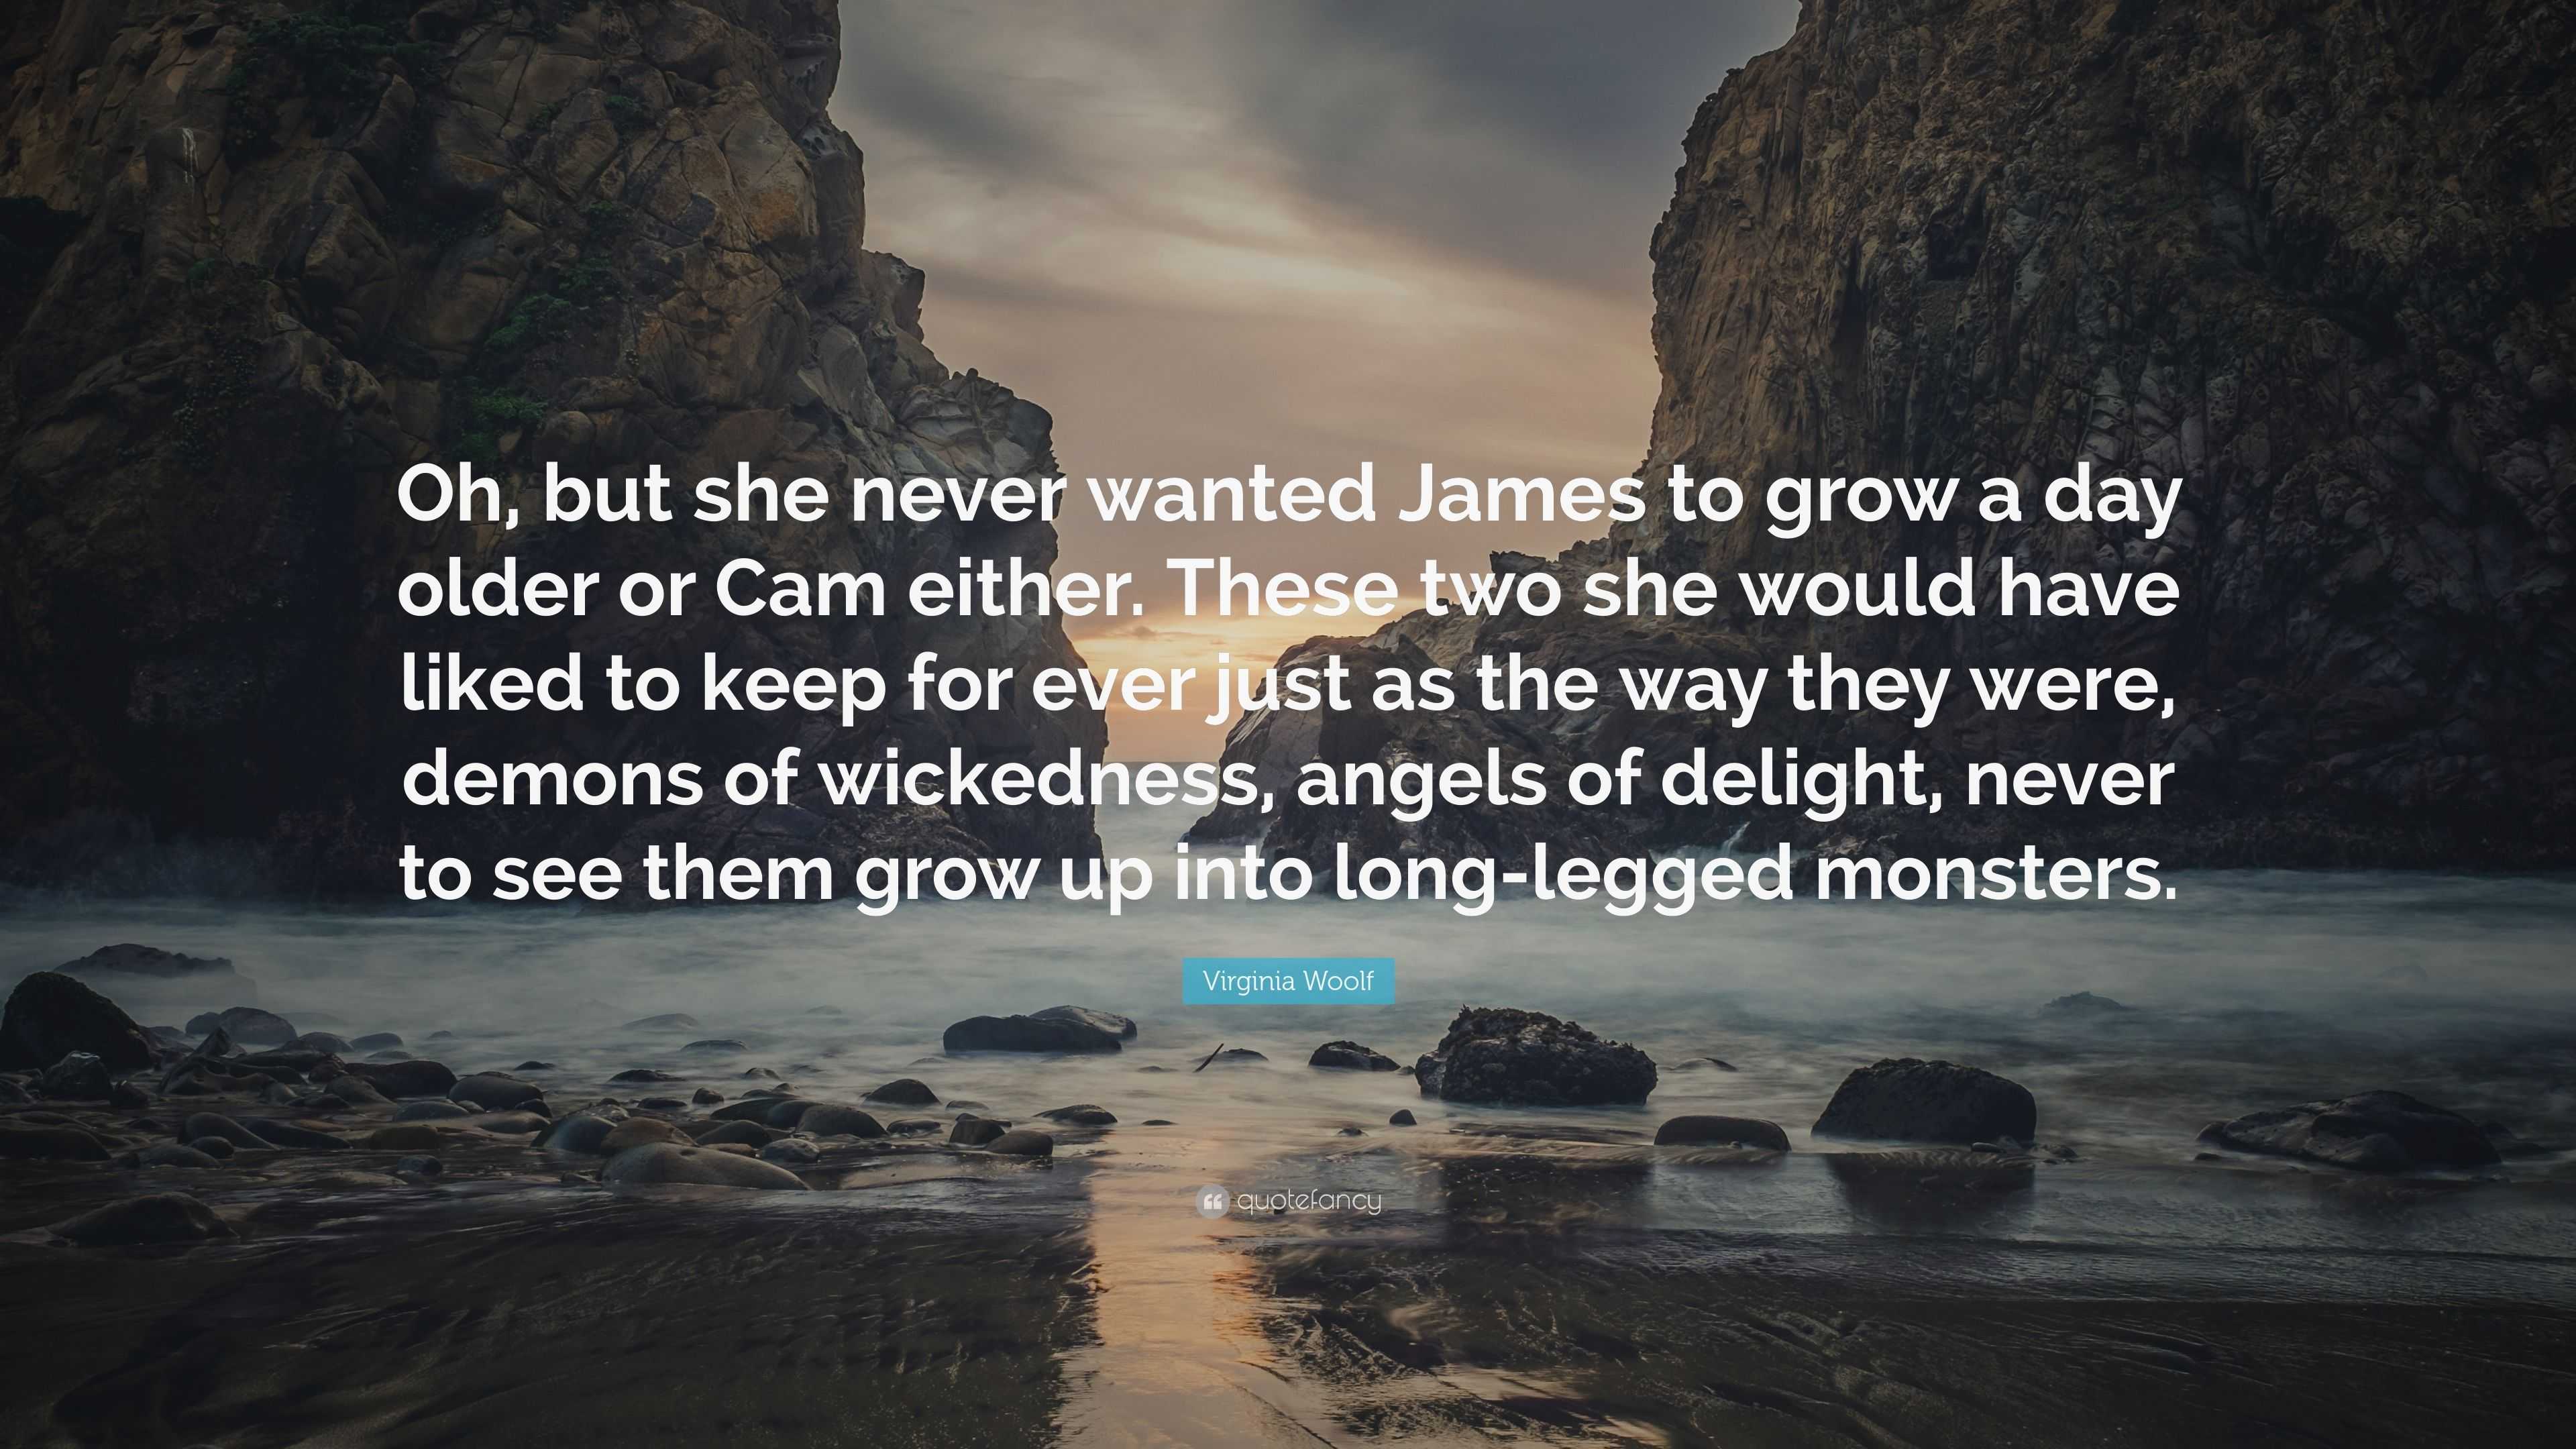 Virginia Woolf Quote: "Oh, but she never wanted James to grow a day older or Cam either. These ...